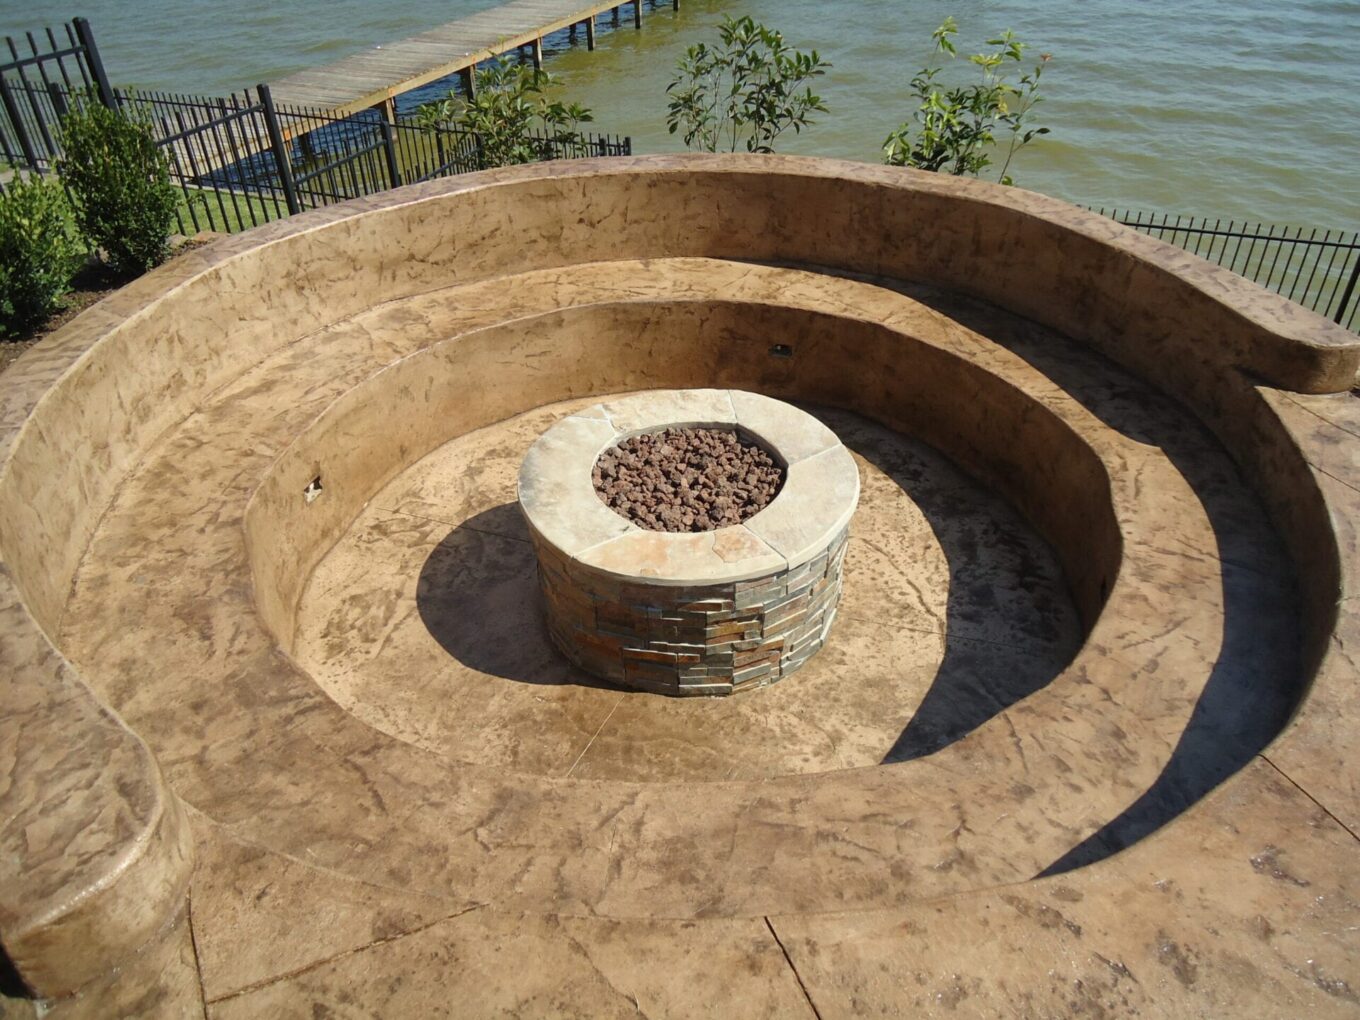 A fire pit sitting next to the water.